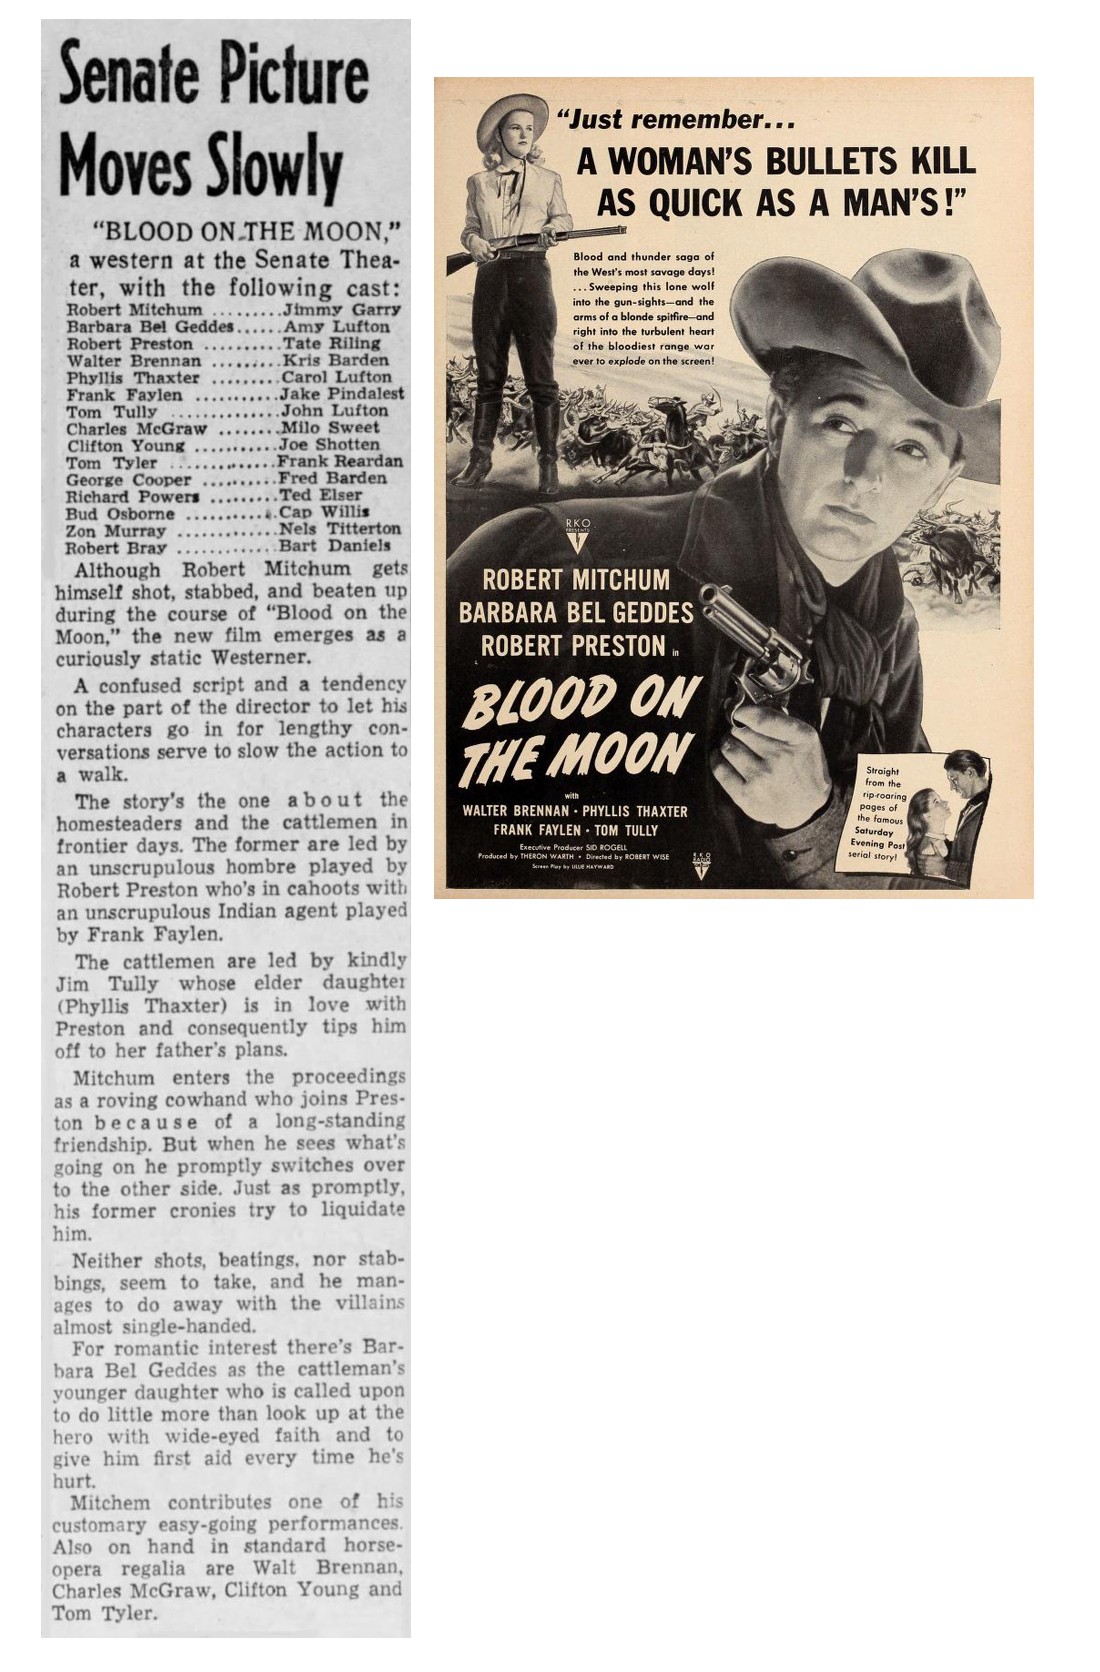 Blood on the Moon film review one page ad